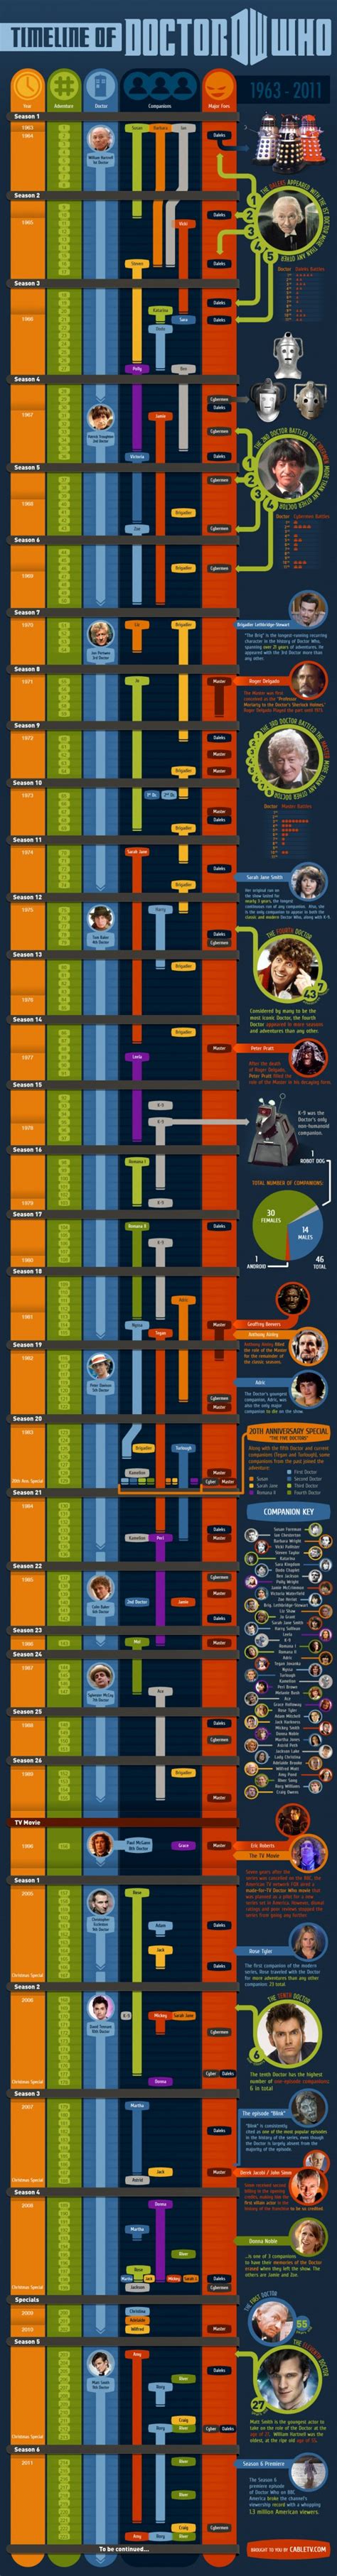 How To Make An Infographic In 9 Steps Examples Doctor Who